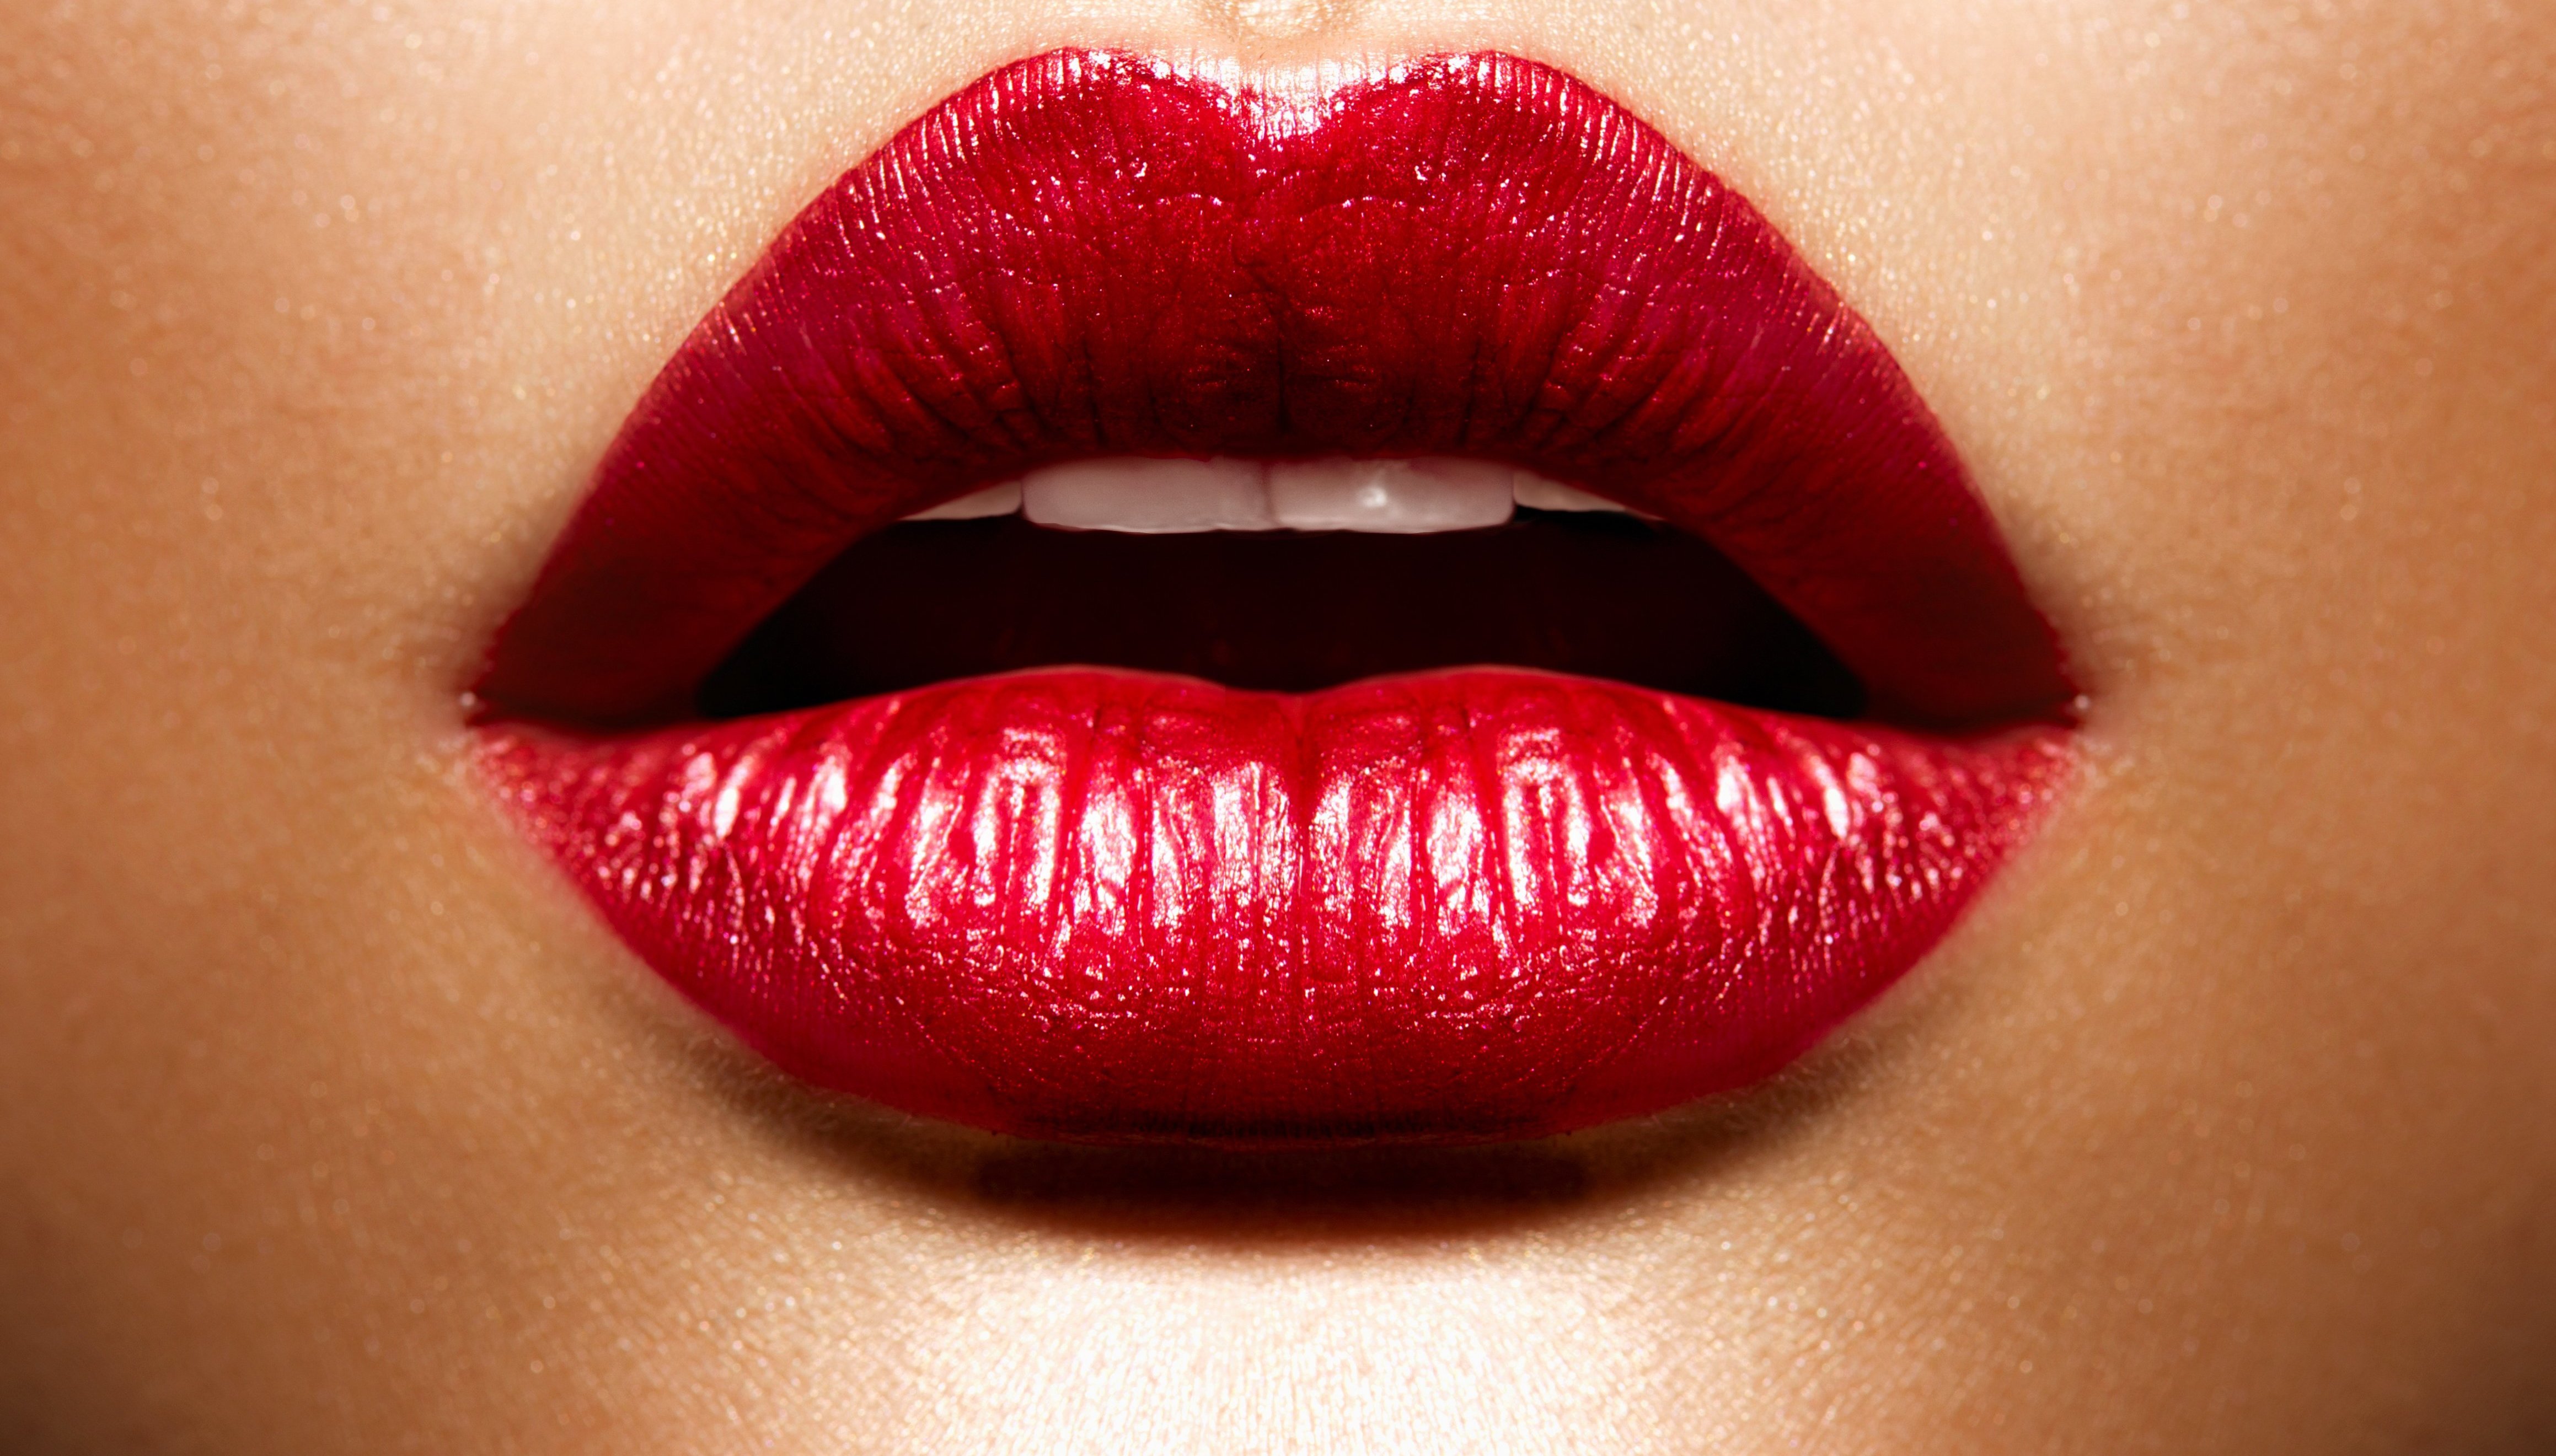 Red Lips 4k Ultra HD Wallpaper Background Image